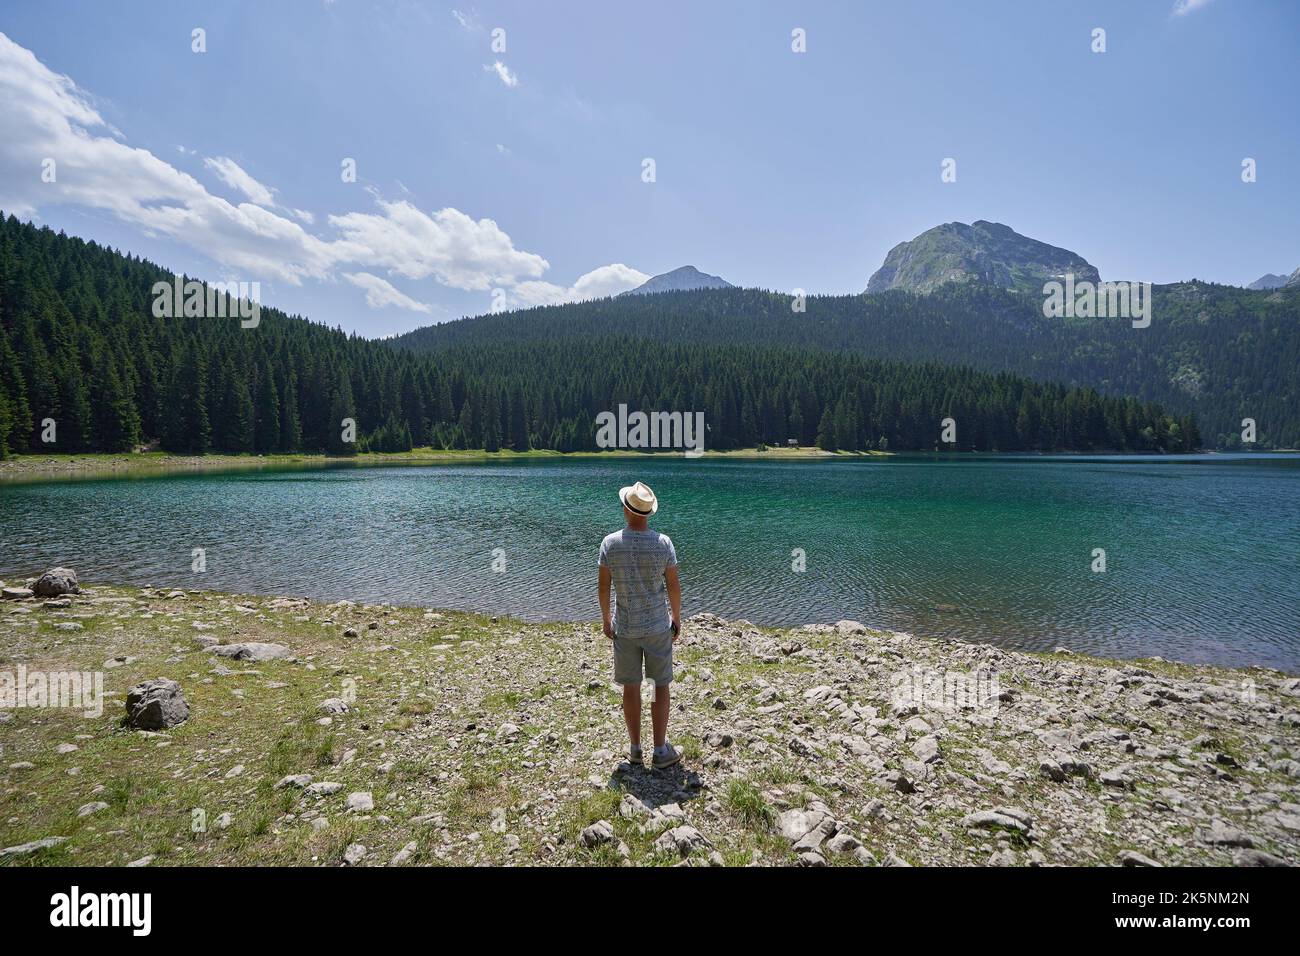 Tourist enjoys nature and life, looking at the lake and mountains. Stock Photo